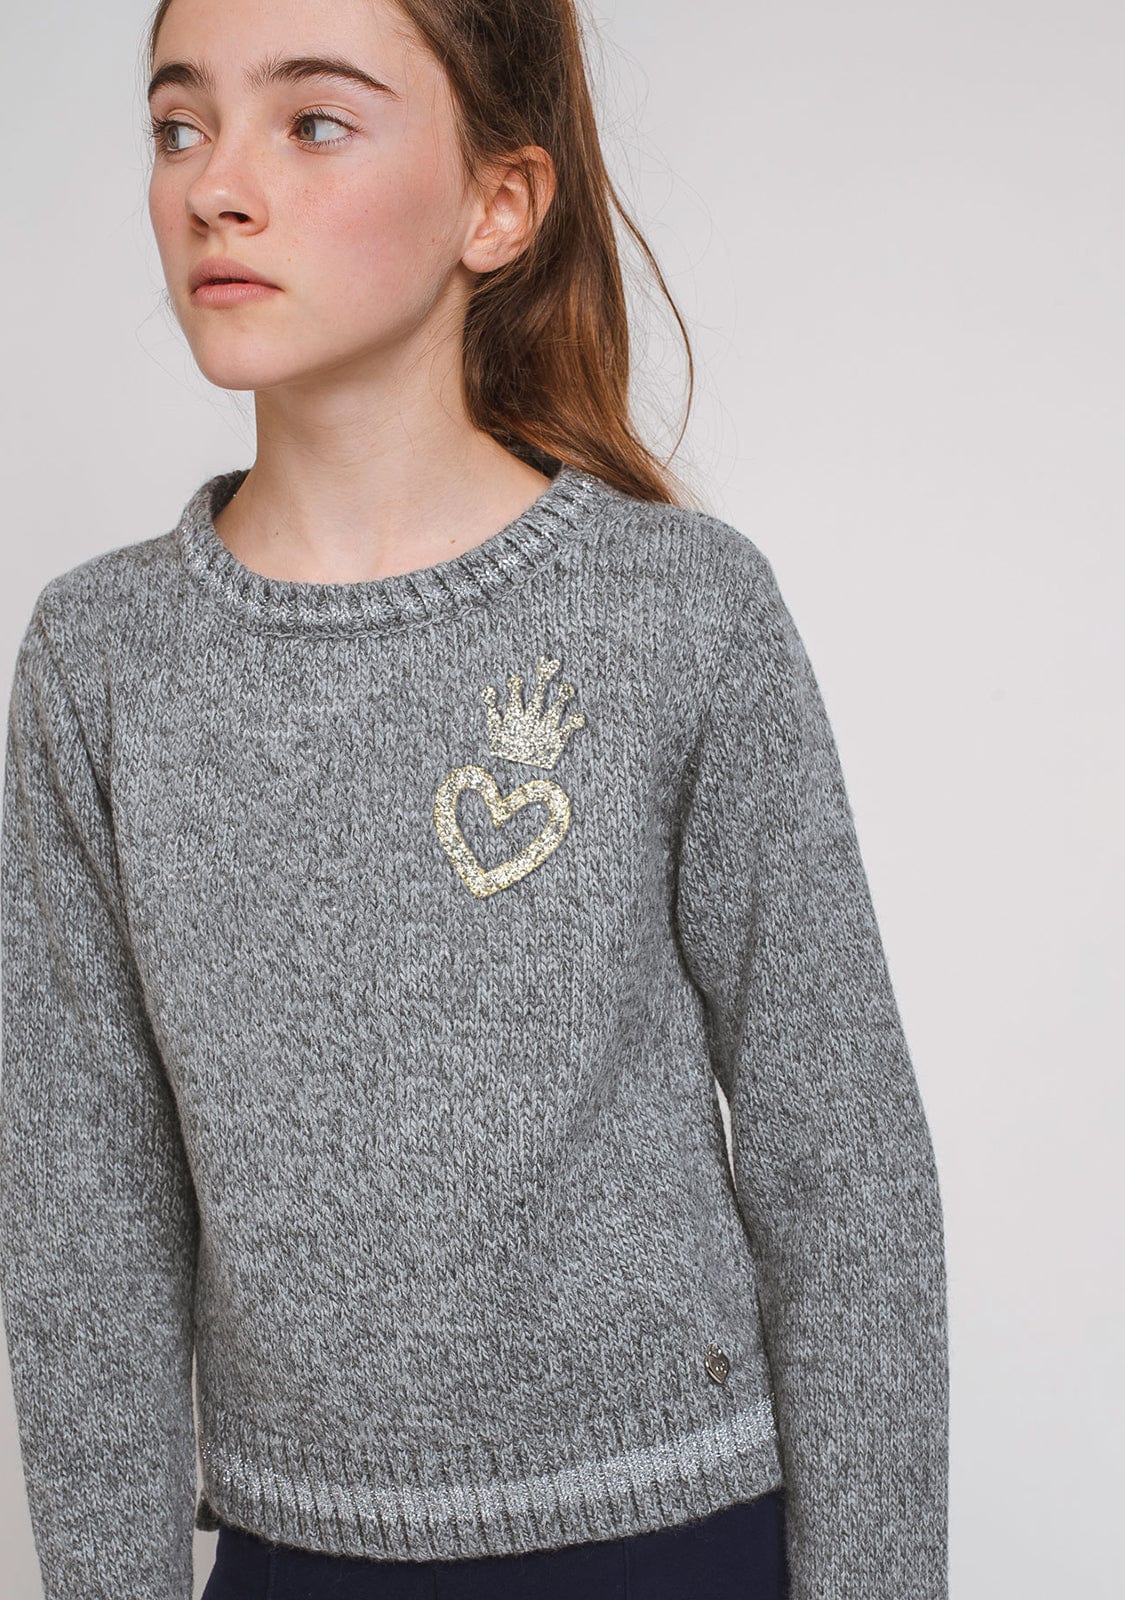 CONGUITOS TEXTIL Clothing Girl's Grey Heart Crown Jersey